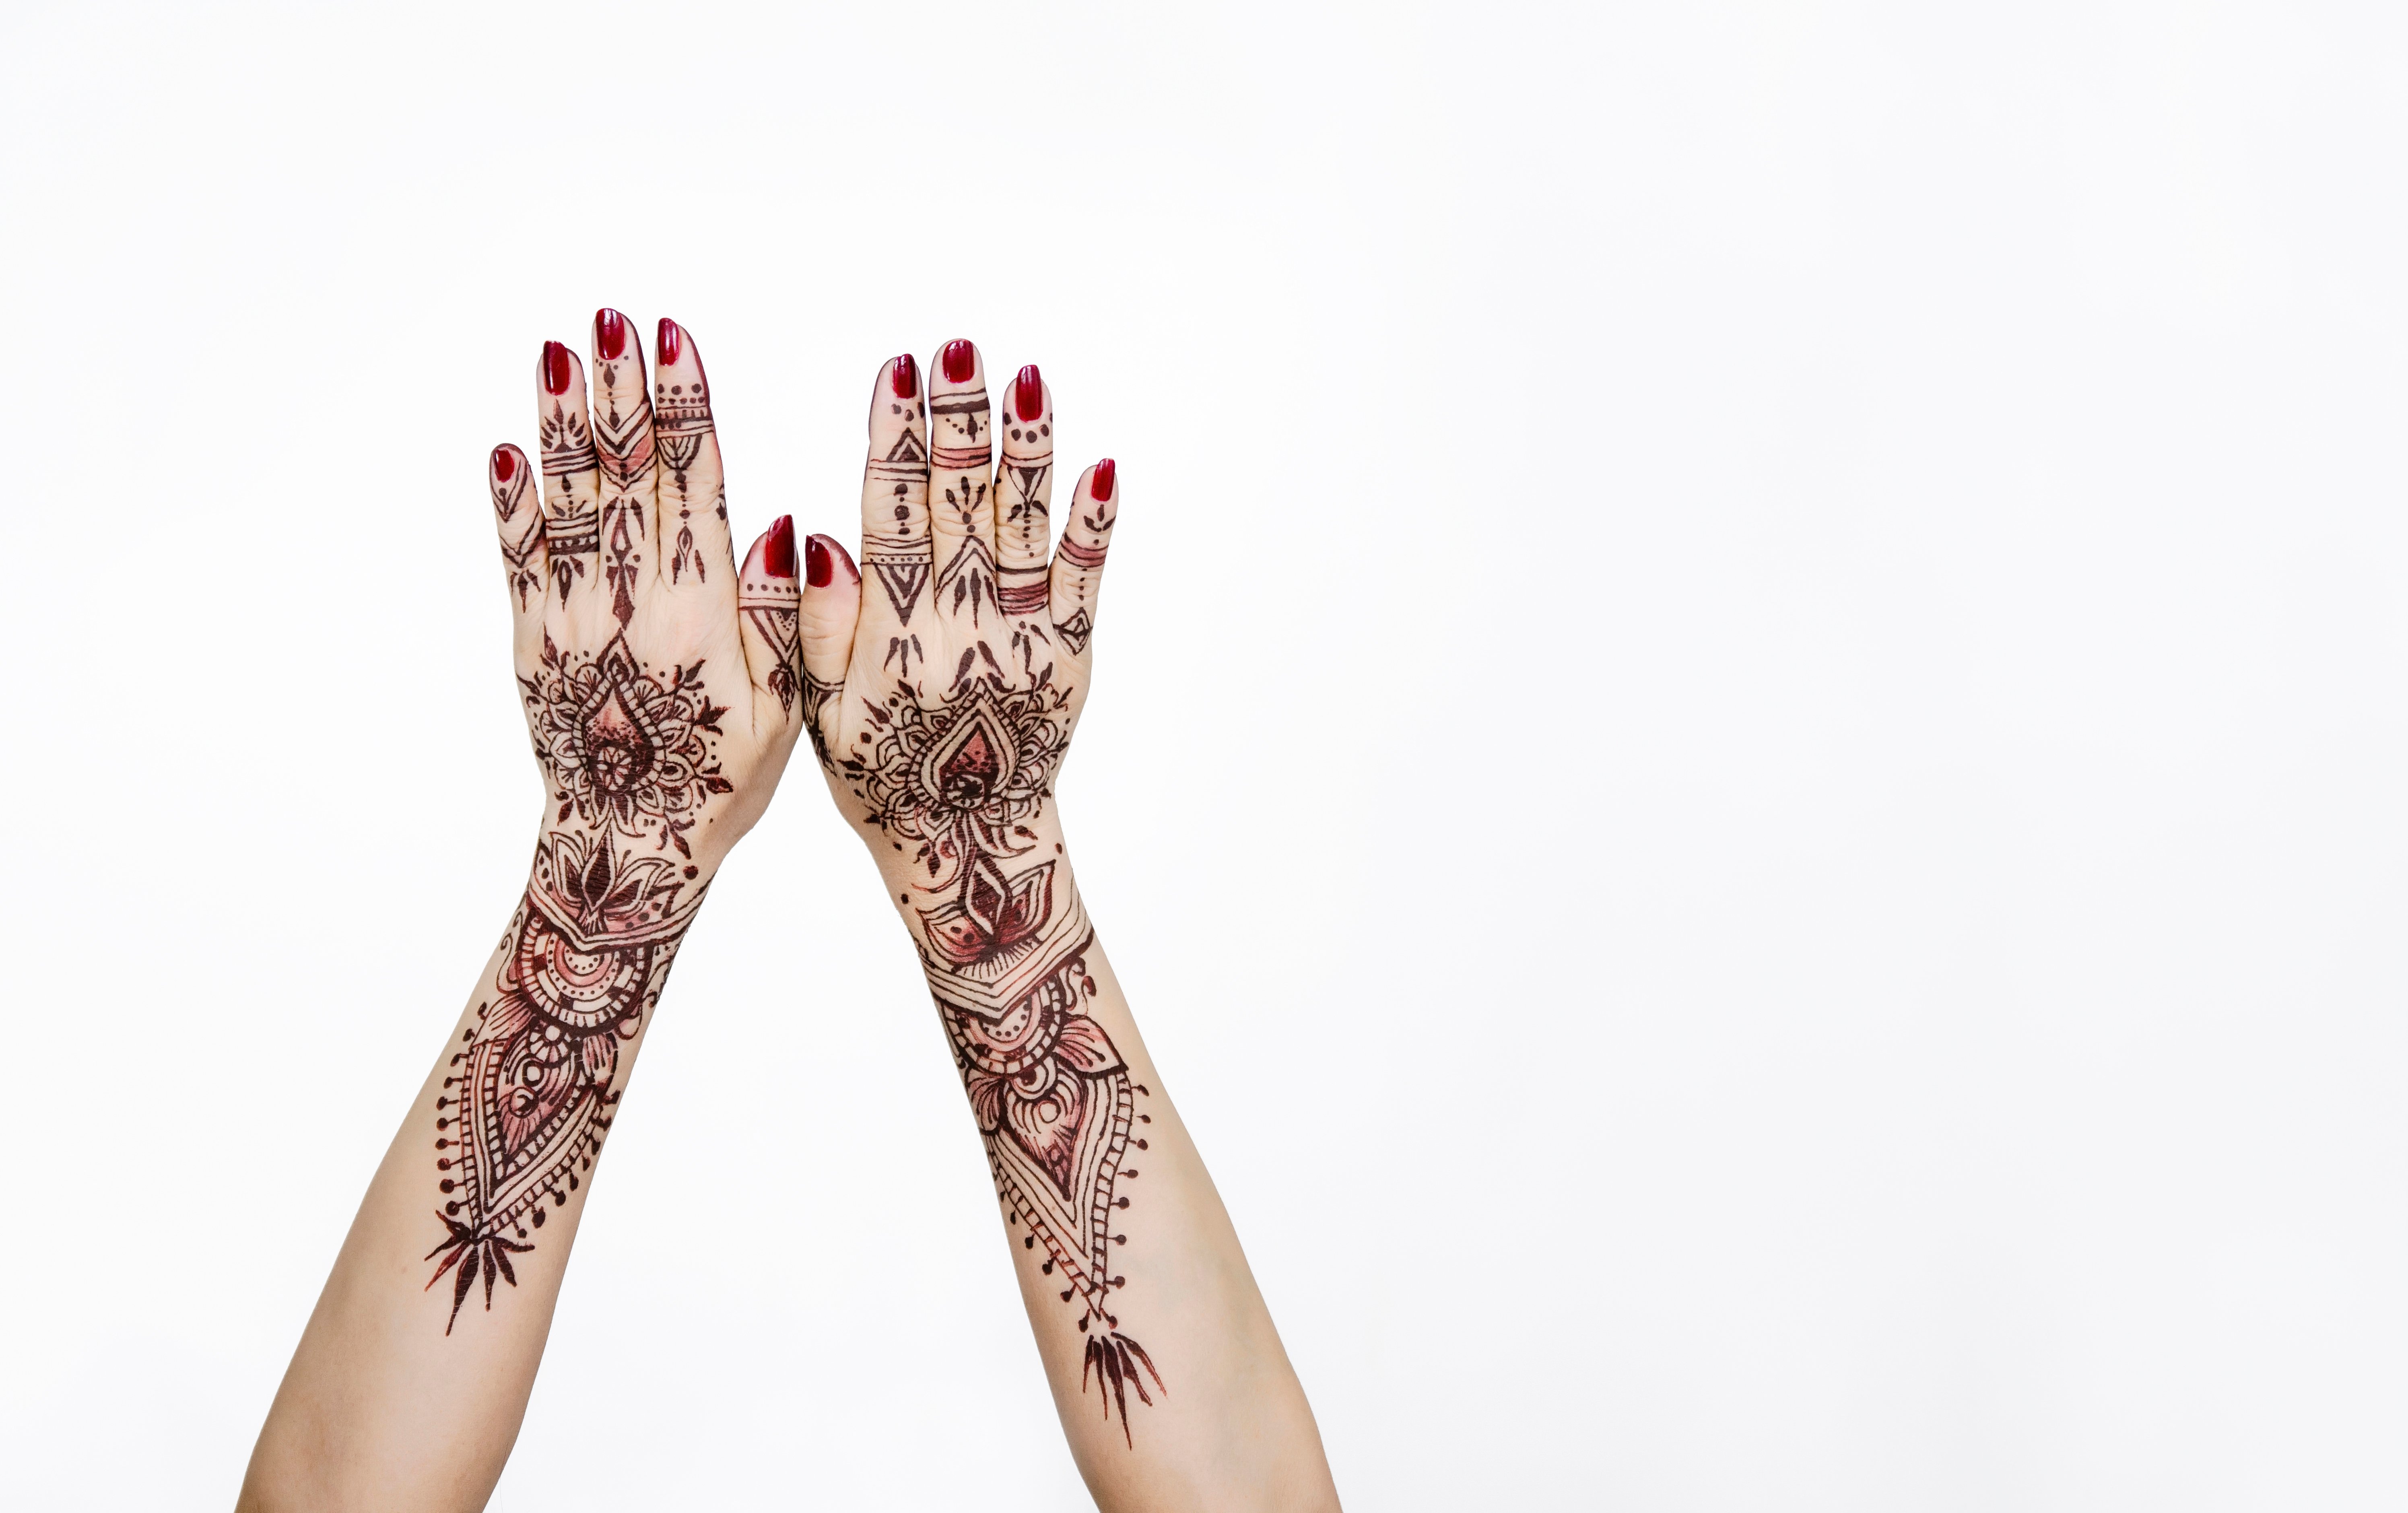 A close-up image of a woman's hands with henna tattoos against a white background. | Source: Getty Images